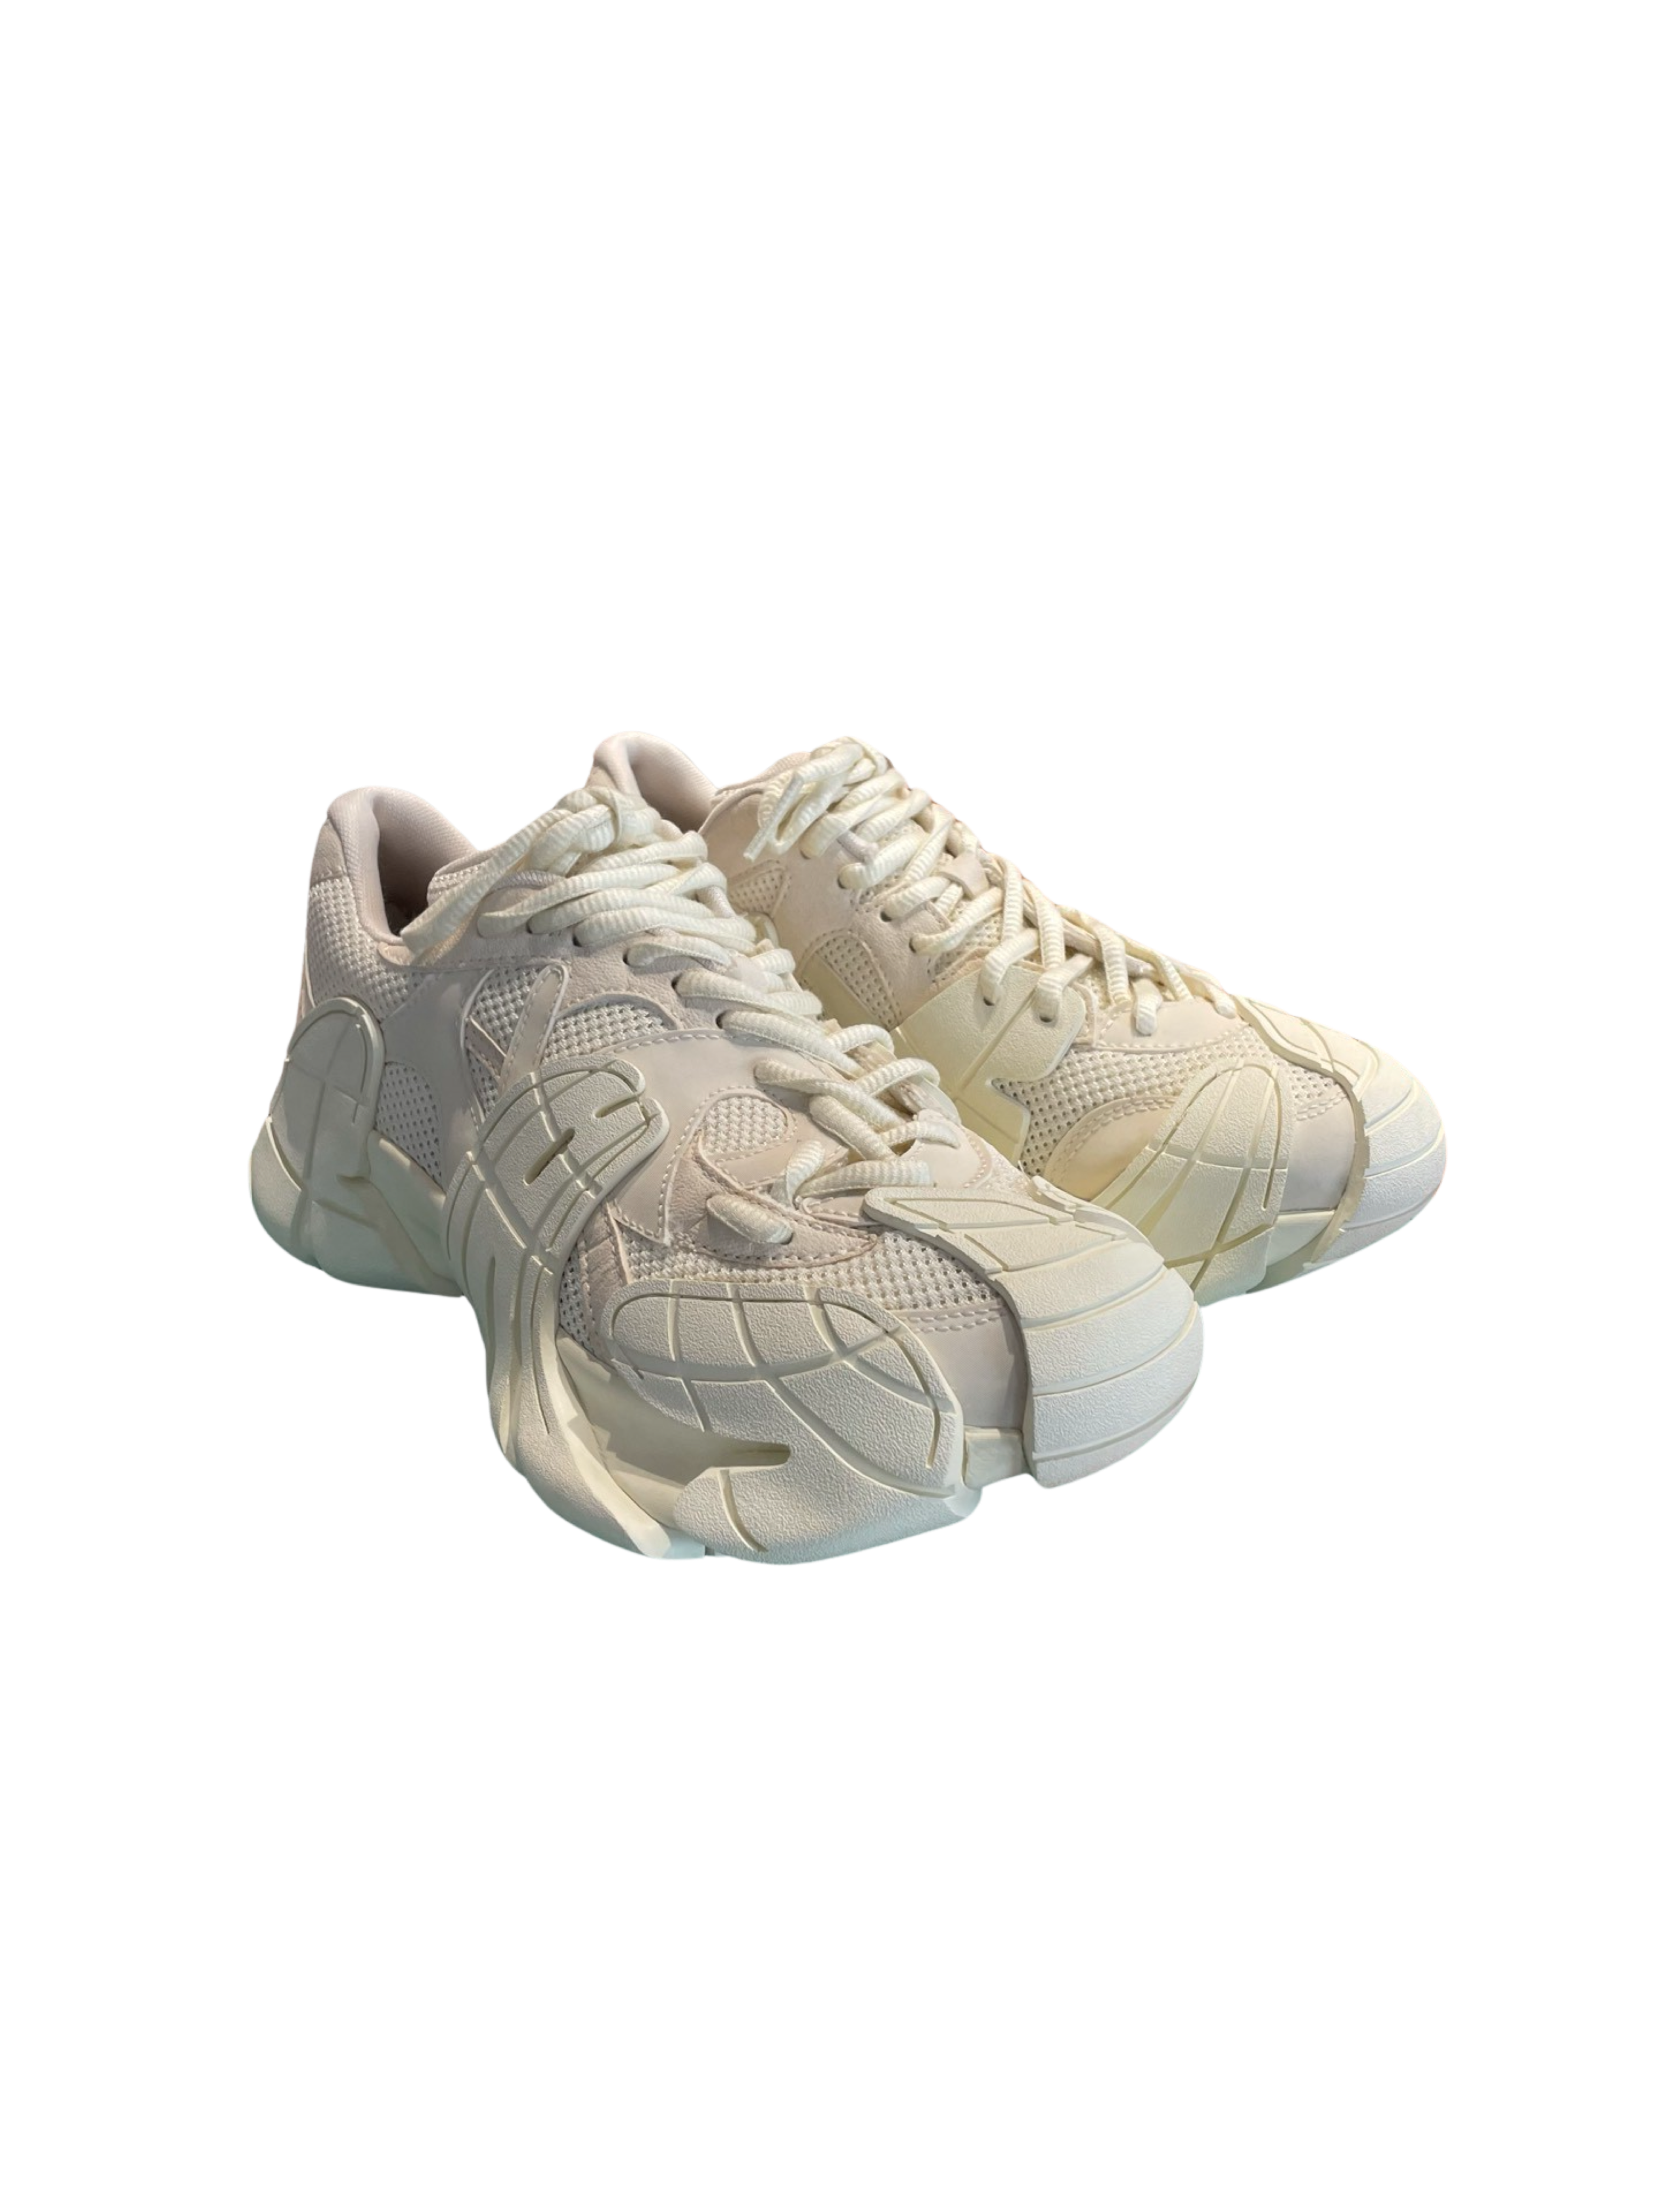 CAMPER LAB TORMENTA LOW TOP SNEAKER Shoes White